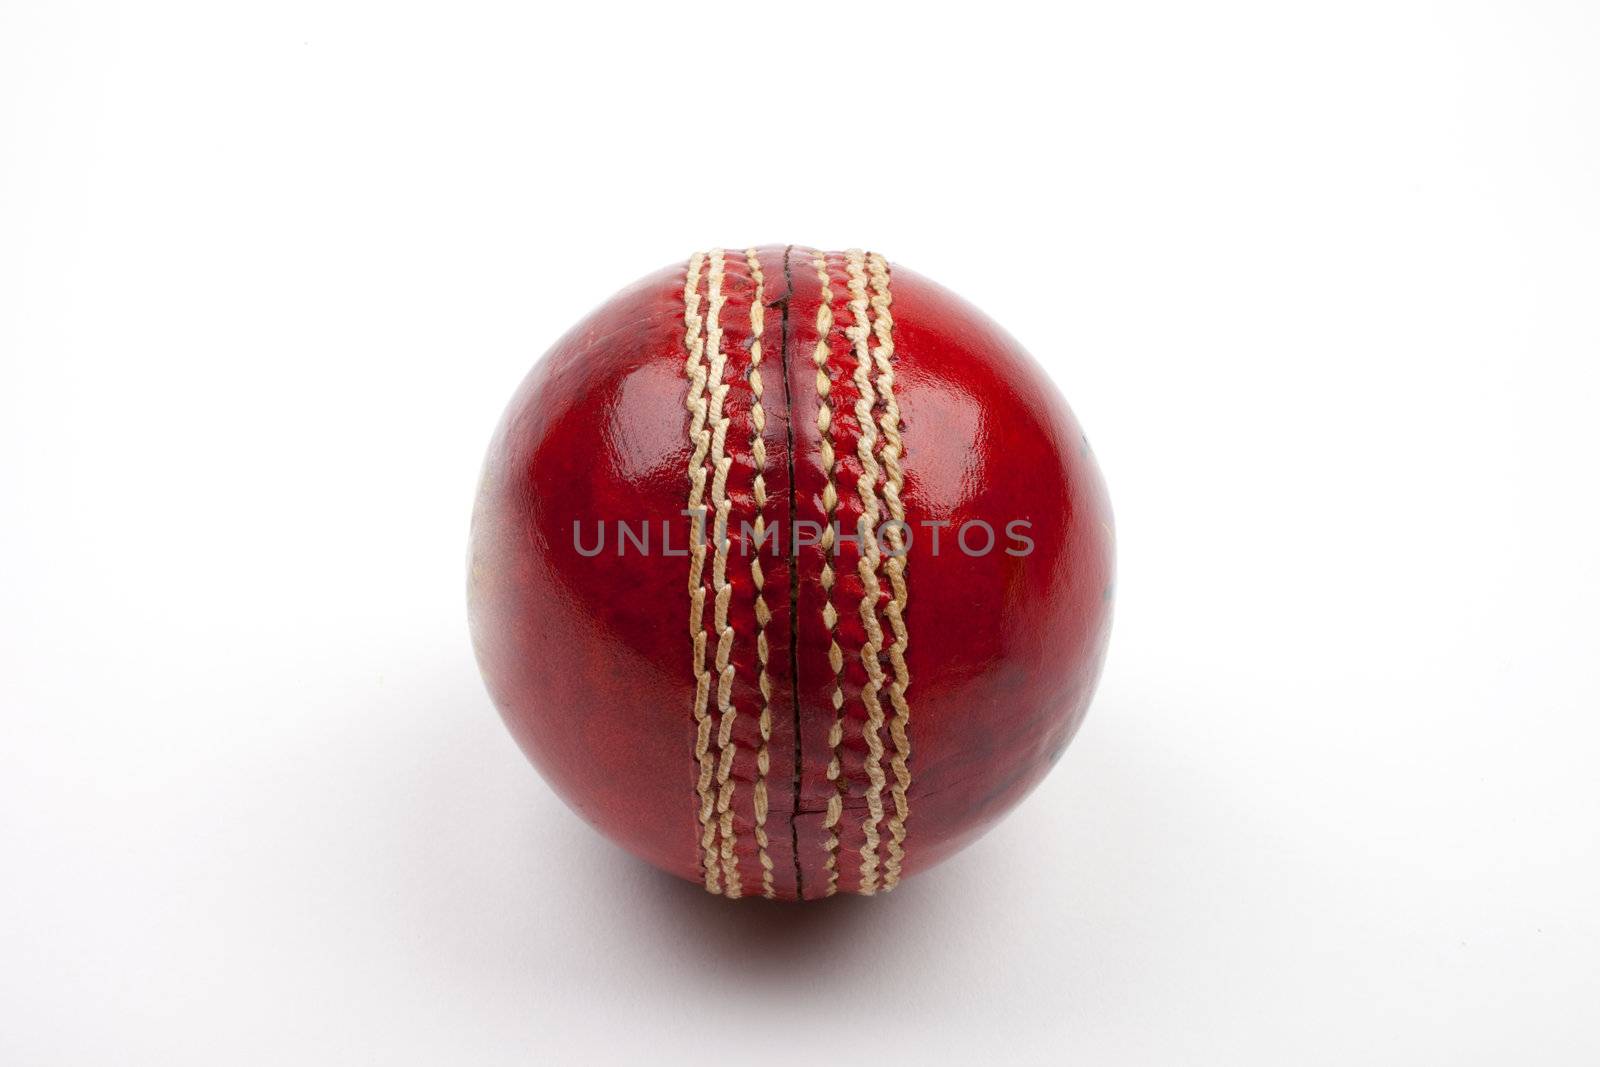 A Close-up shot of a red Cricket ball on white background.